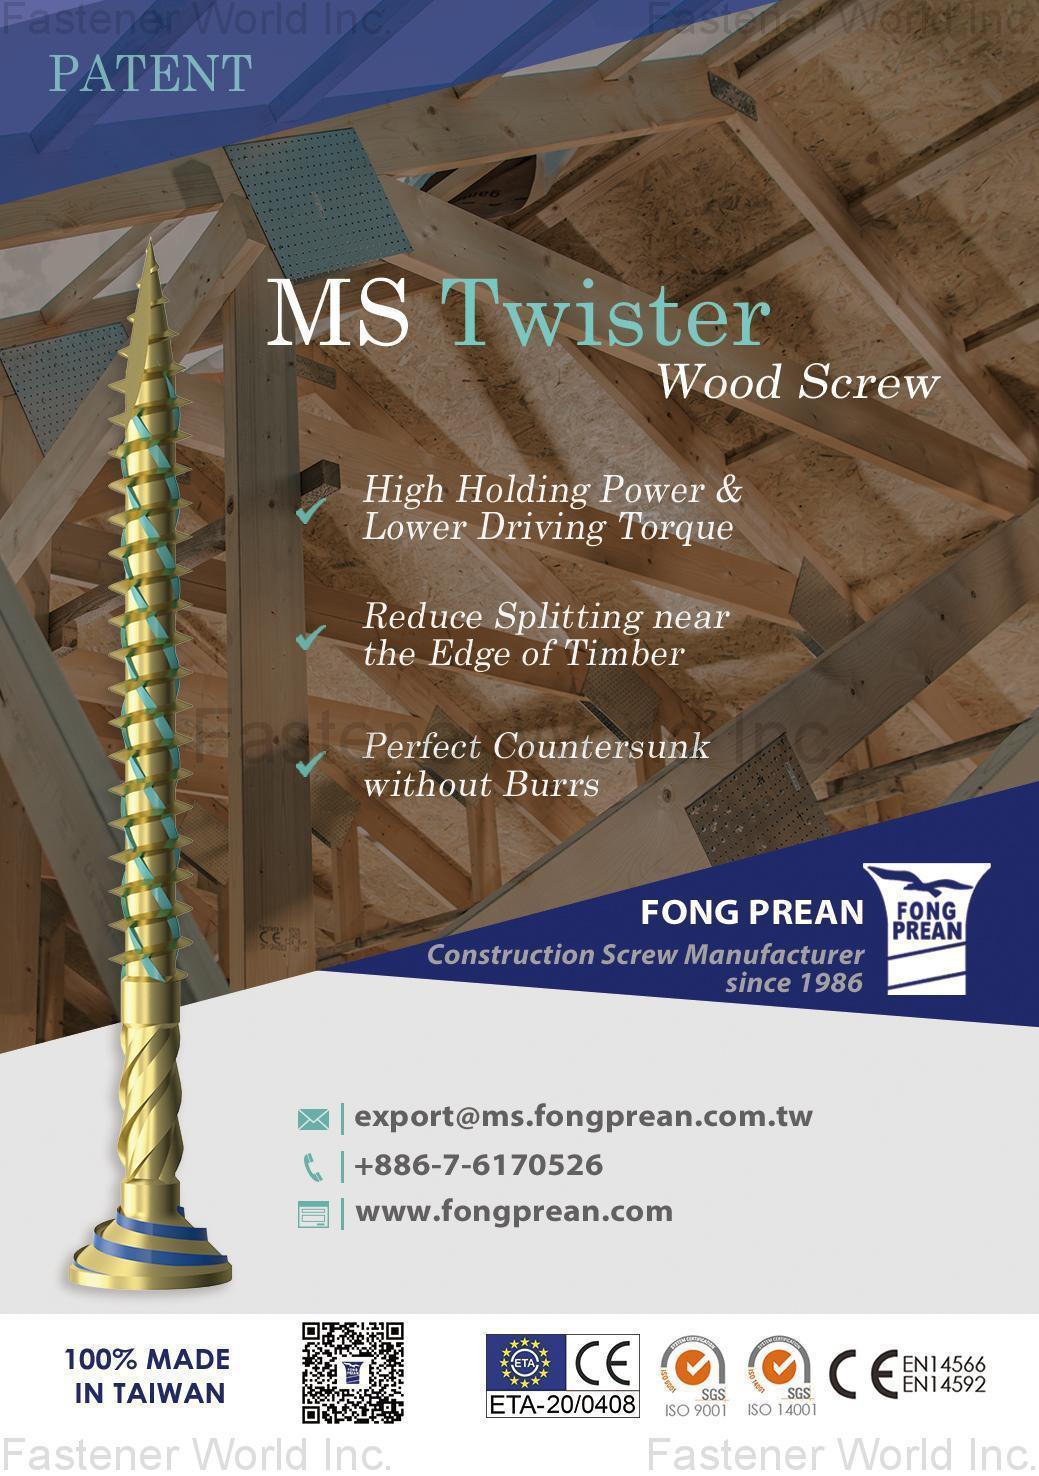 FONG PREAN INDUSTRIAL CO., LTD. , MS Twister Screw for Wood_Patent